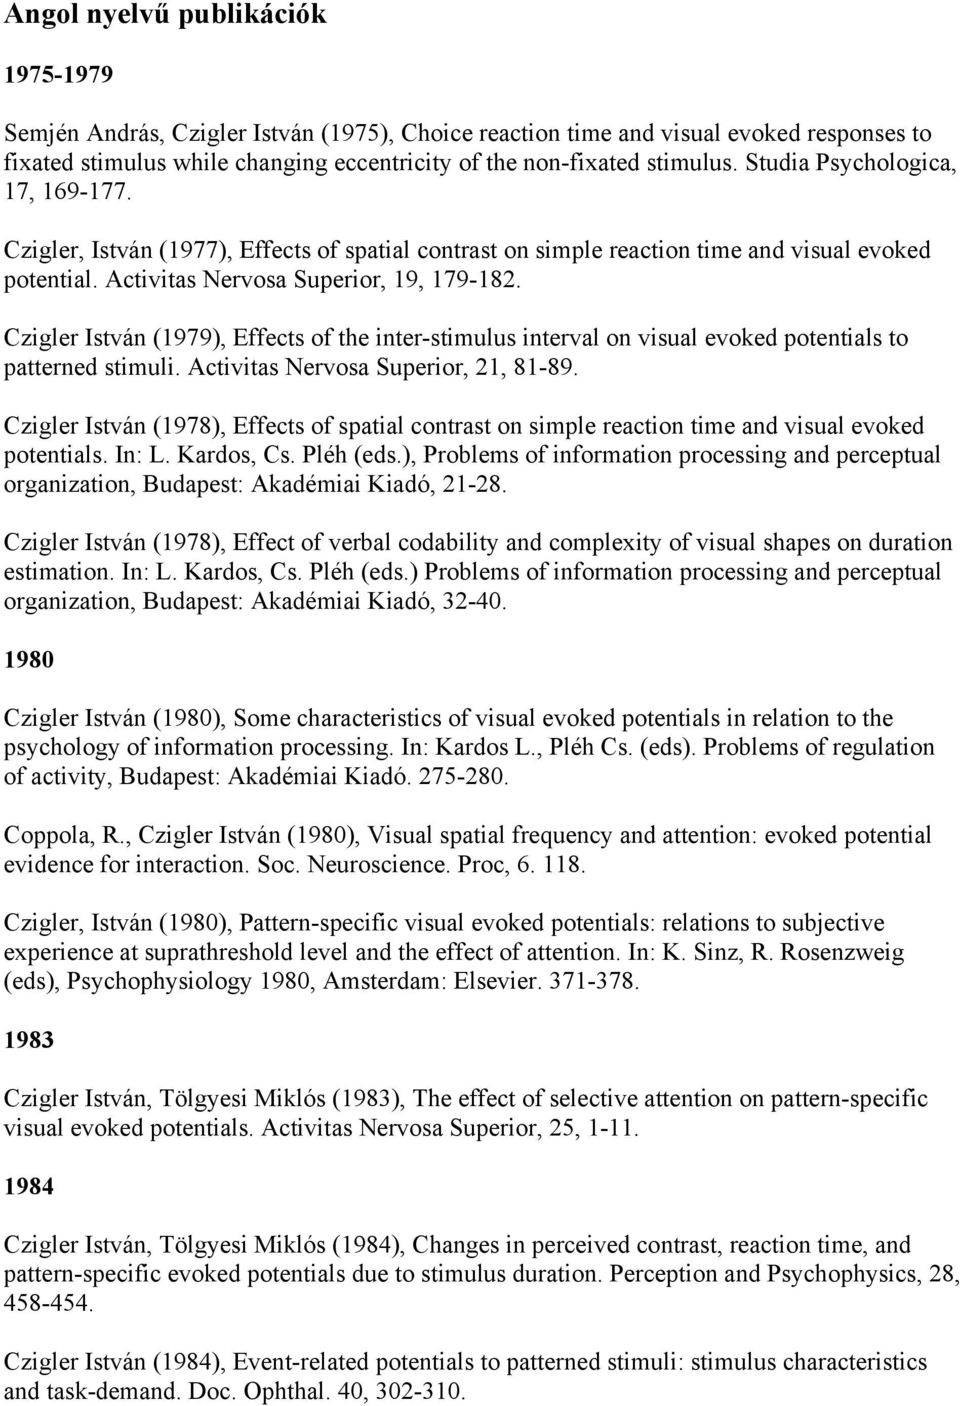 Czigler István (1979), Effects of the inter-stimulus interval on visual evoked potentials to patterned stimuli. Activitas Nervosa Superior, 21, 81-89.